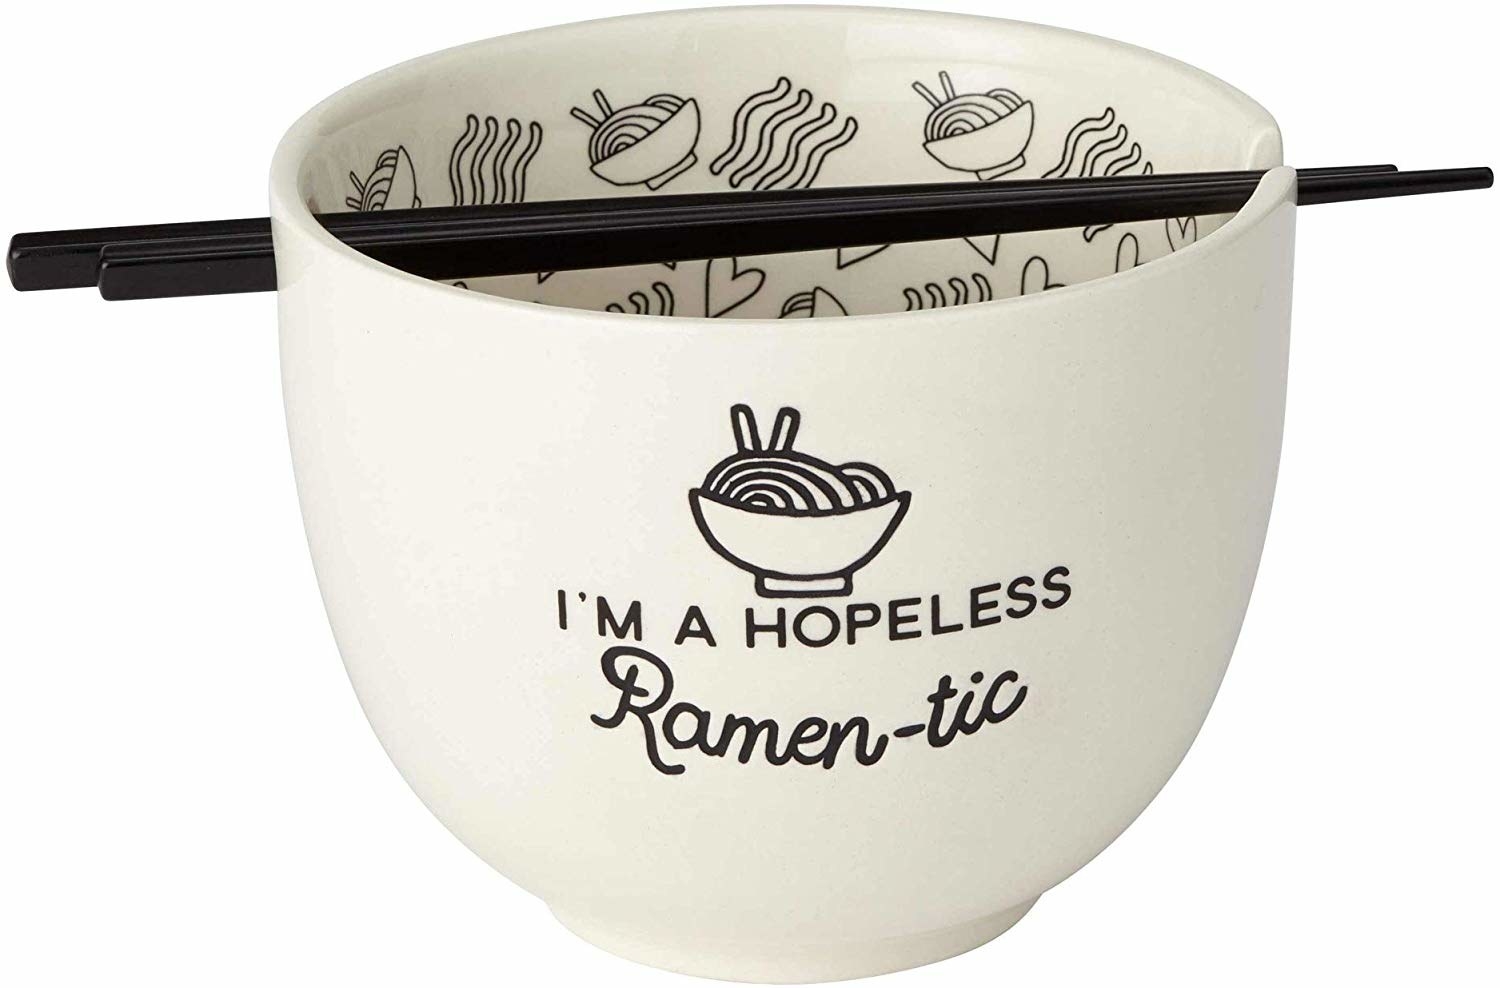 The bowl, which says &quot;I&#x27;m a hopeless ramen-tick&quot; and a ramen/noodle print inside